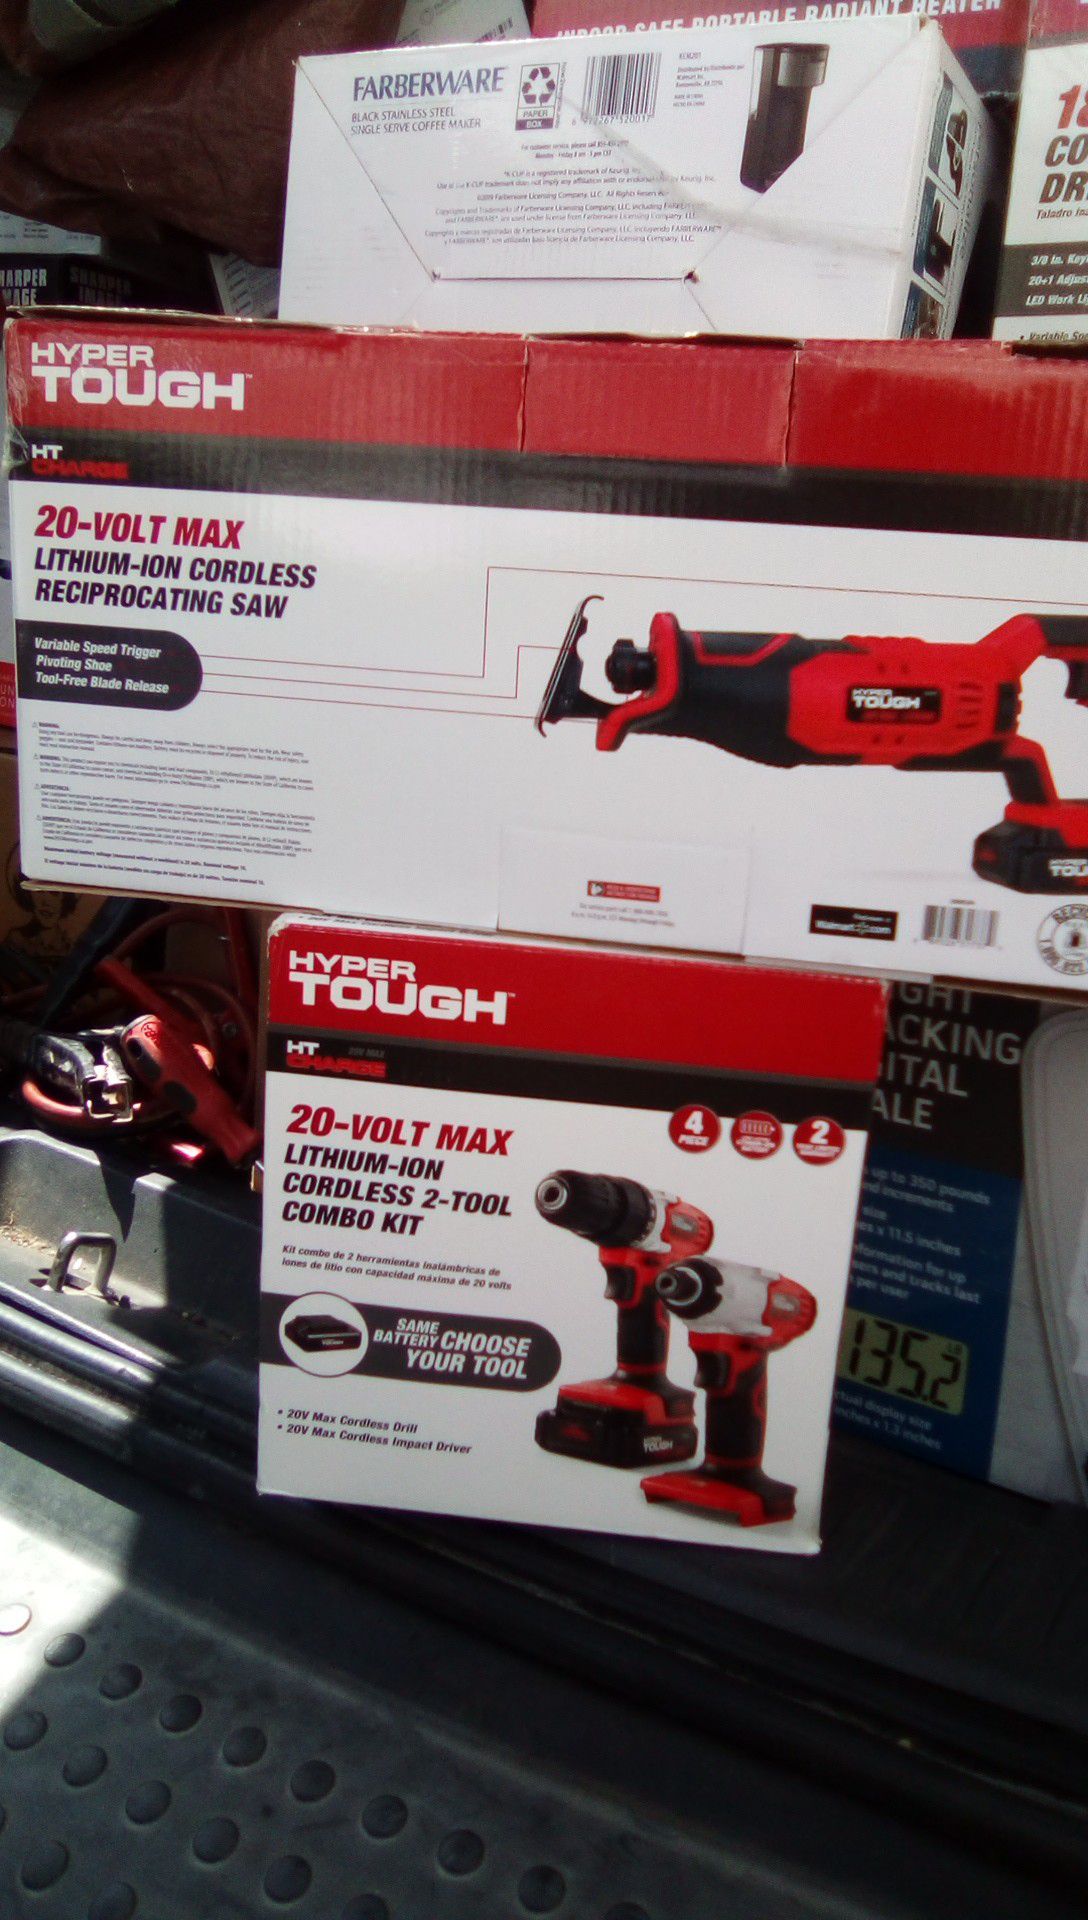 Hypertough cordless drill, impact driver, and reciprocating saw